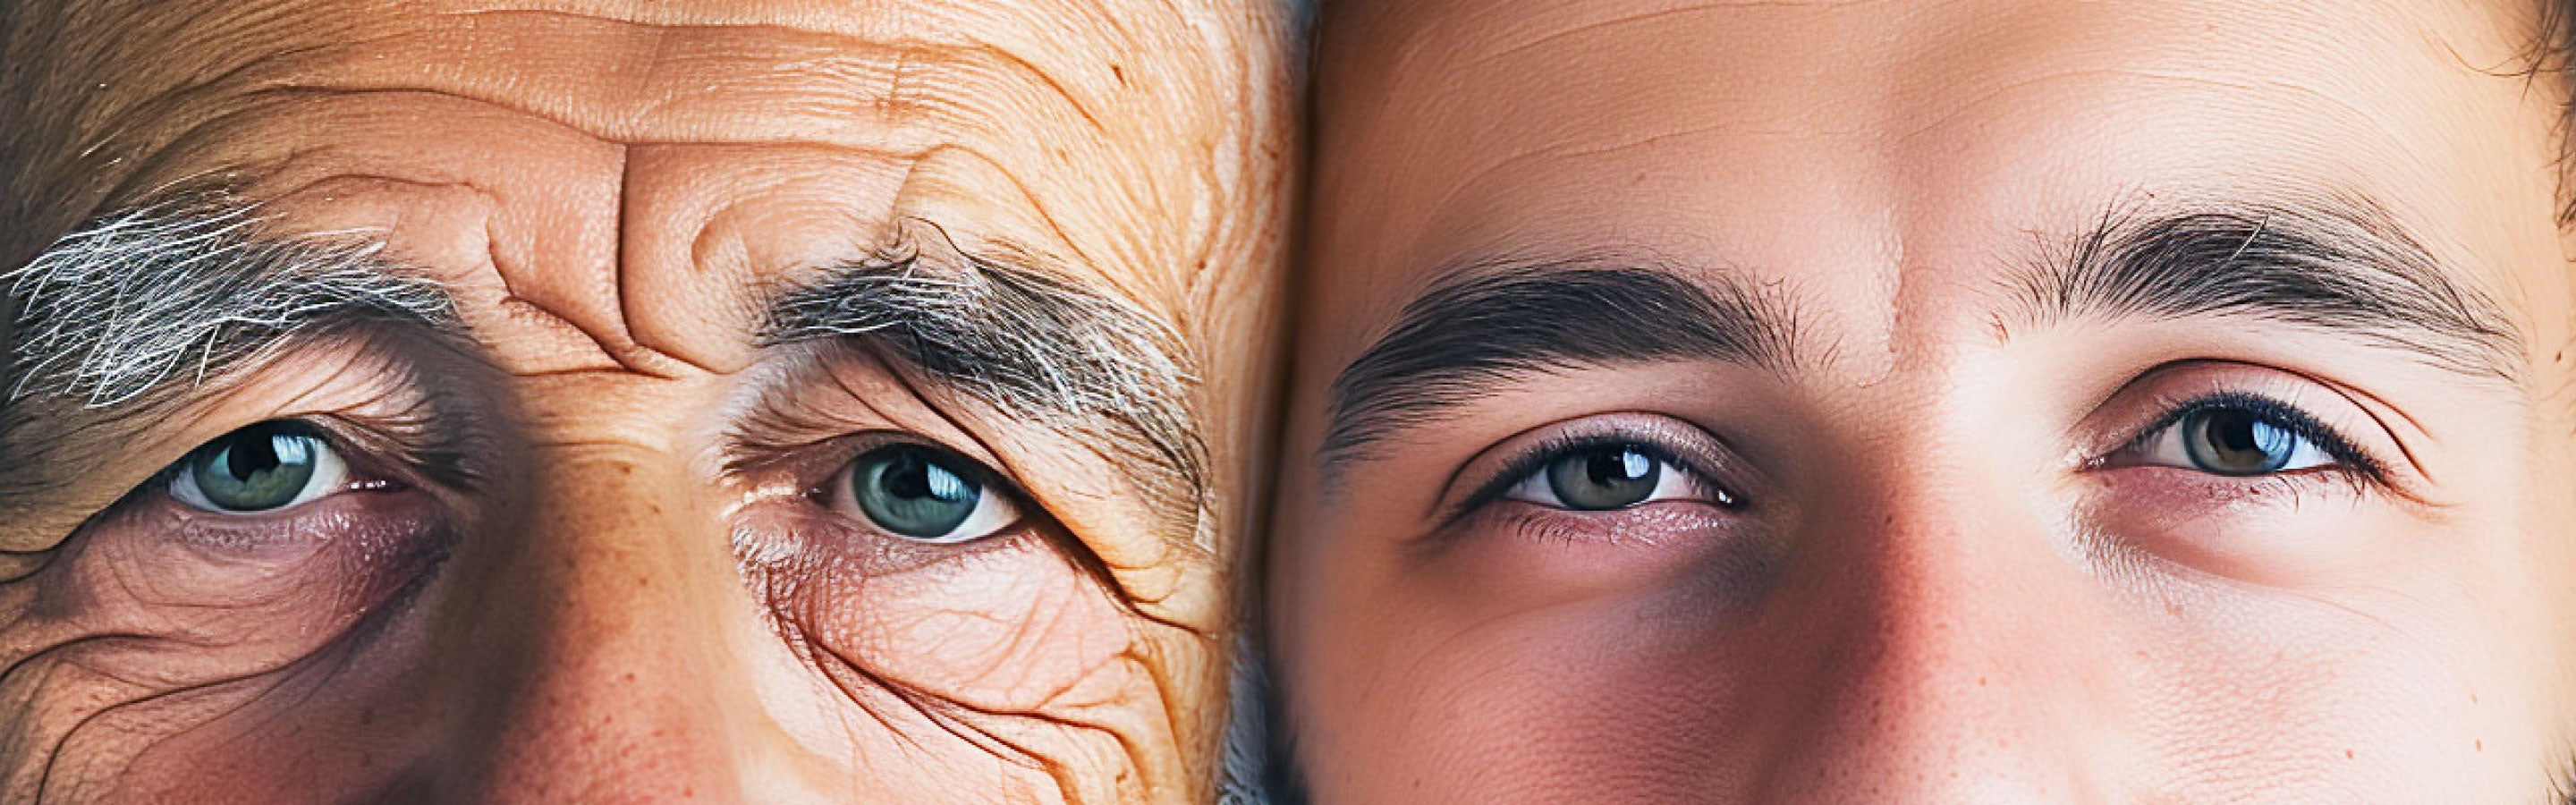 Chronological Aging vs Biological Aging: Its Impact on Longevity